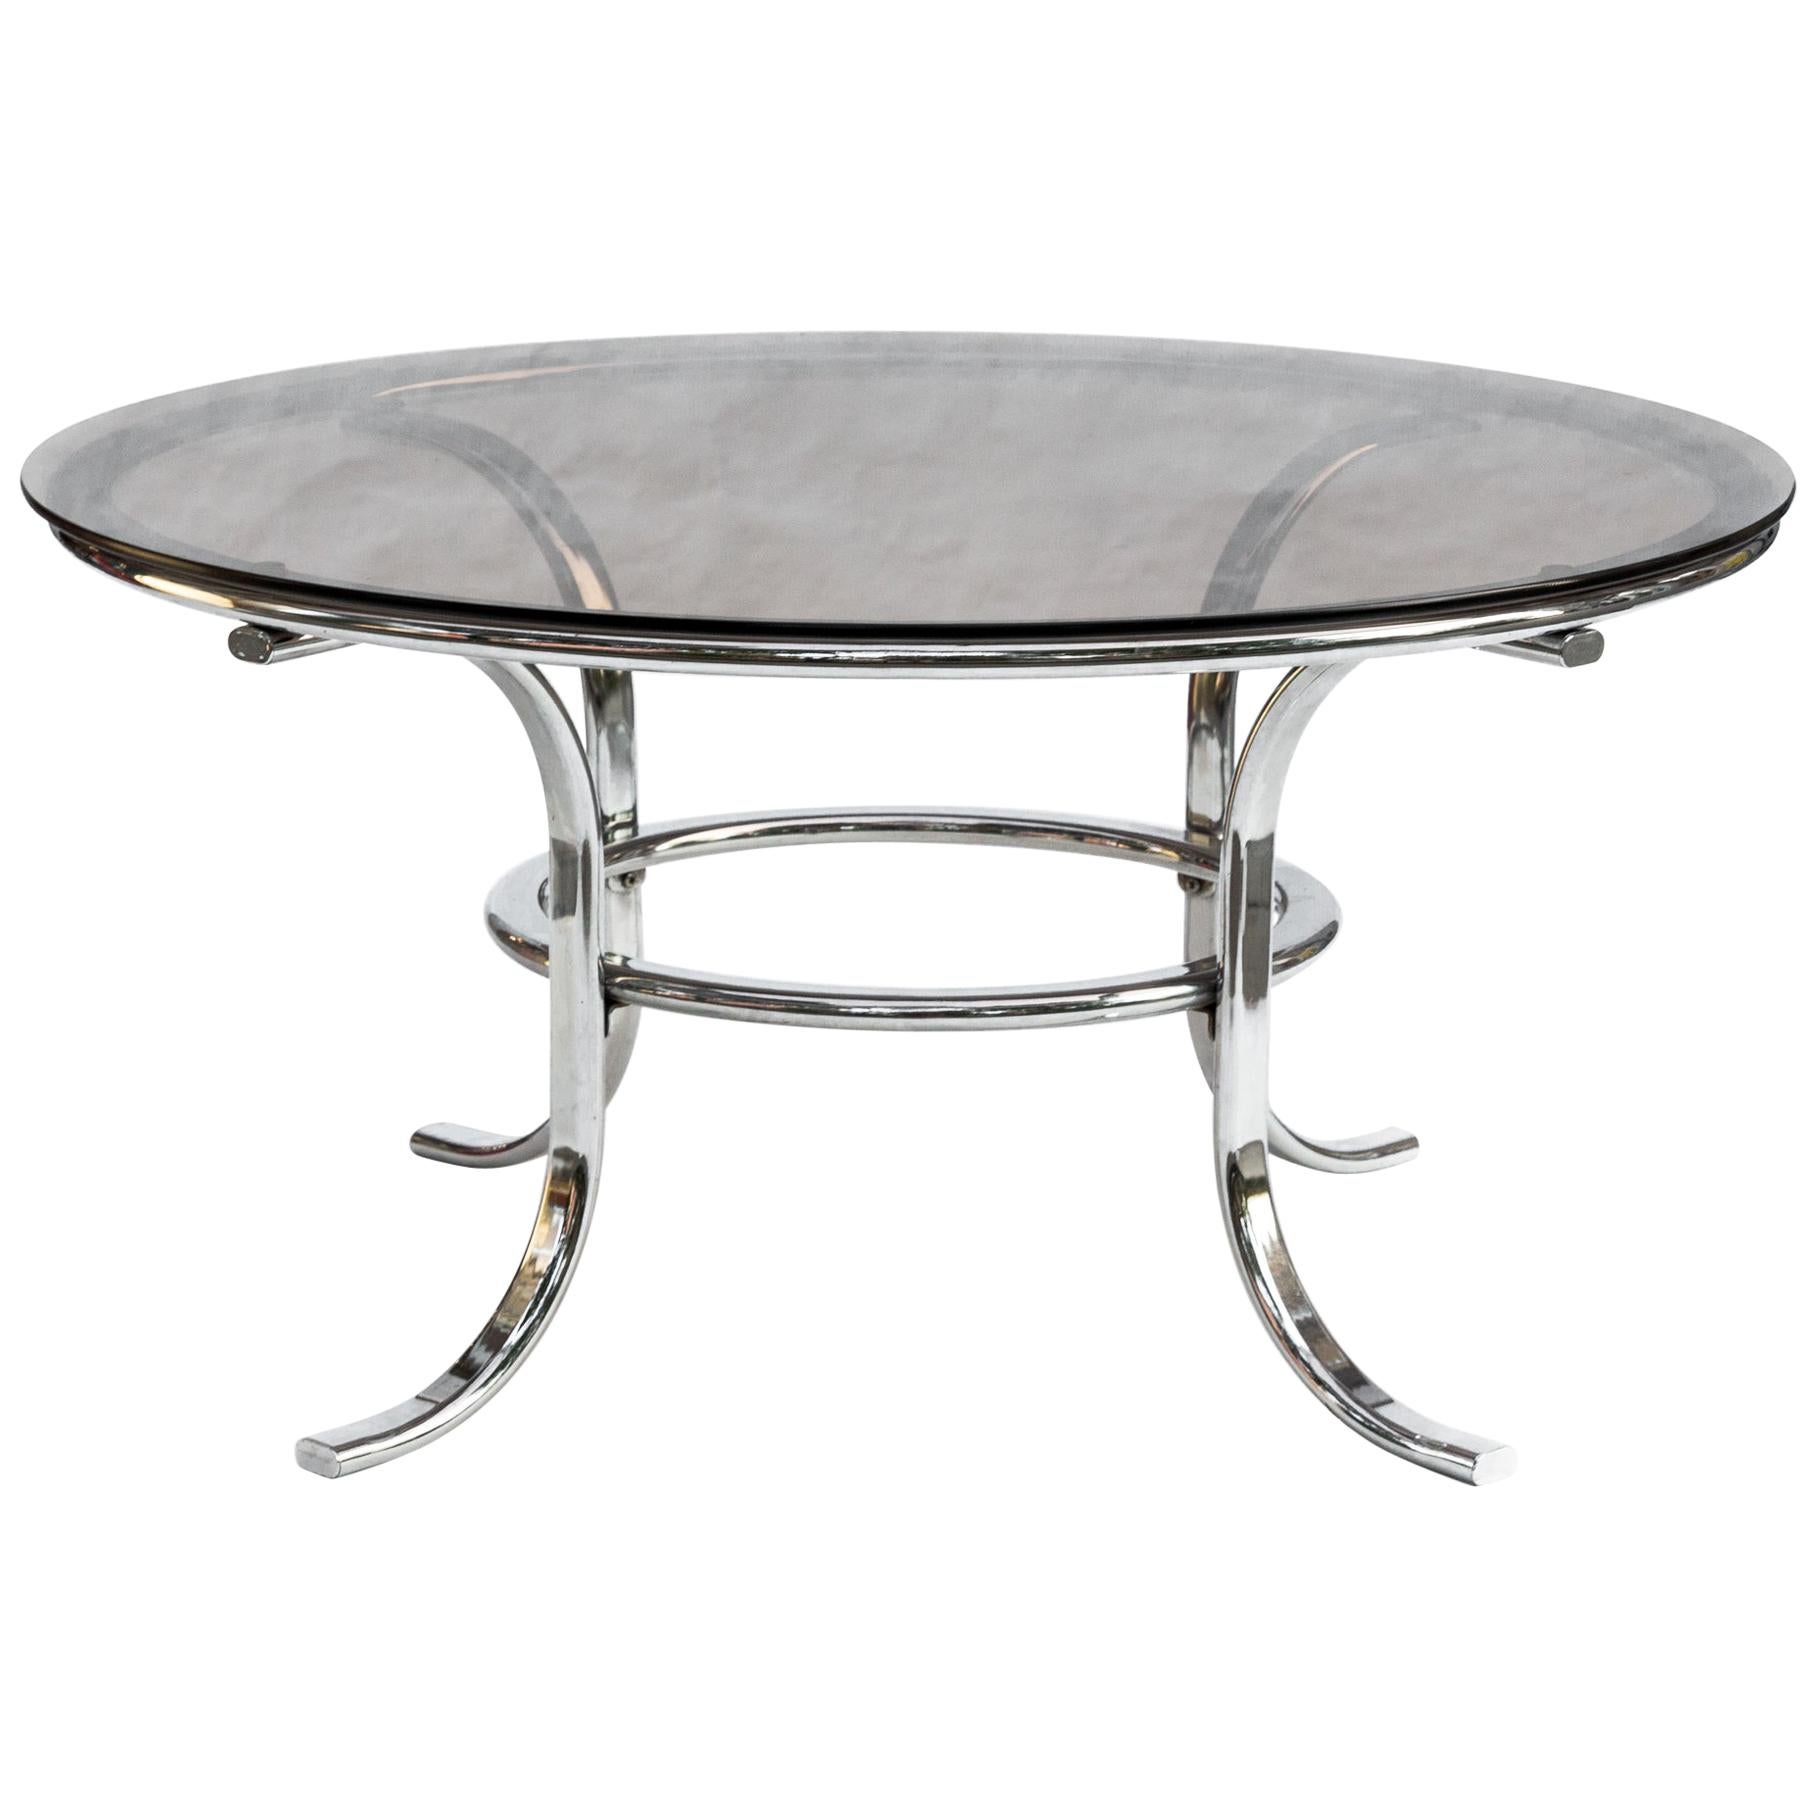 Round Modern Smoked Glass and Chrome Coffee Table, 1970s For Sale